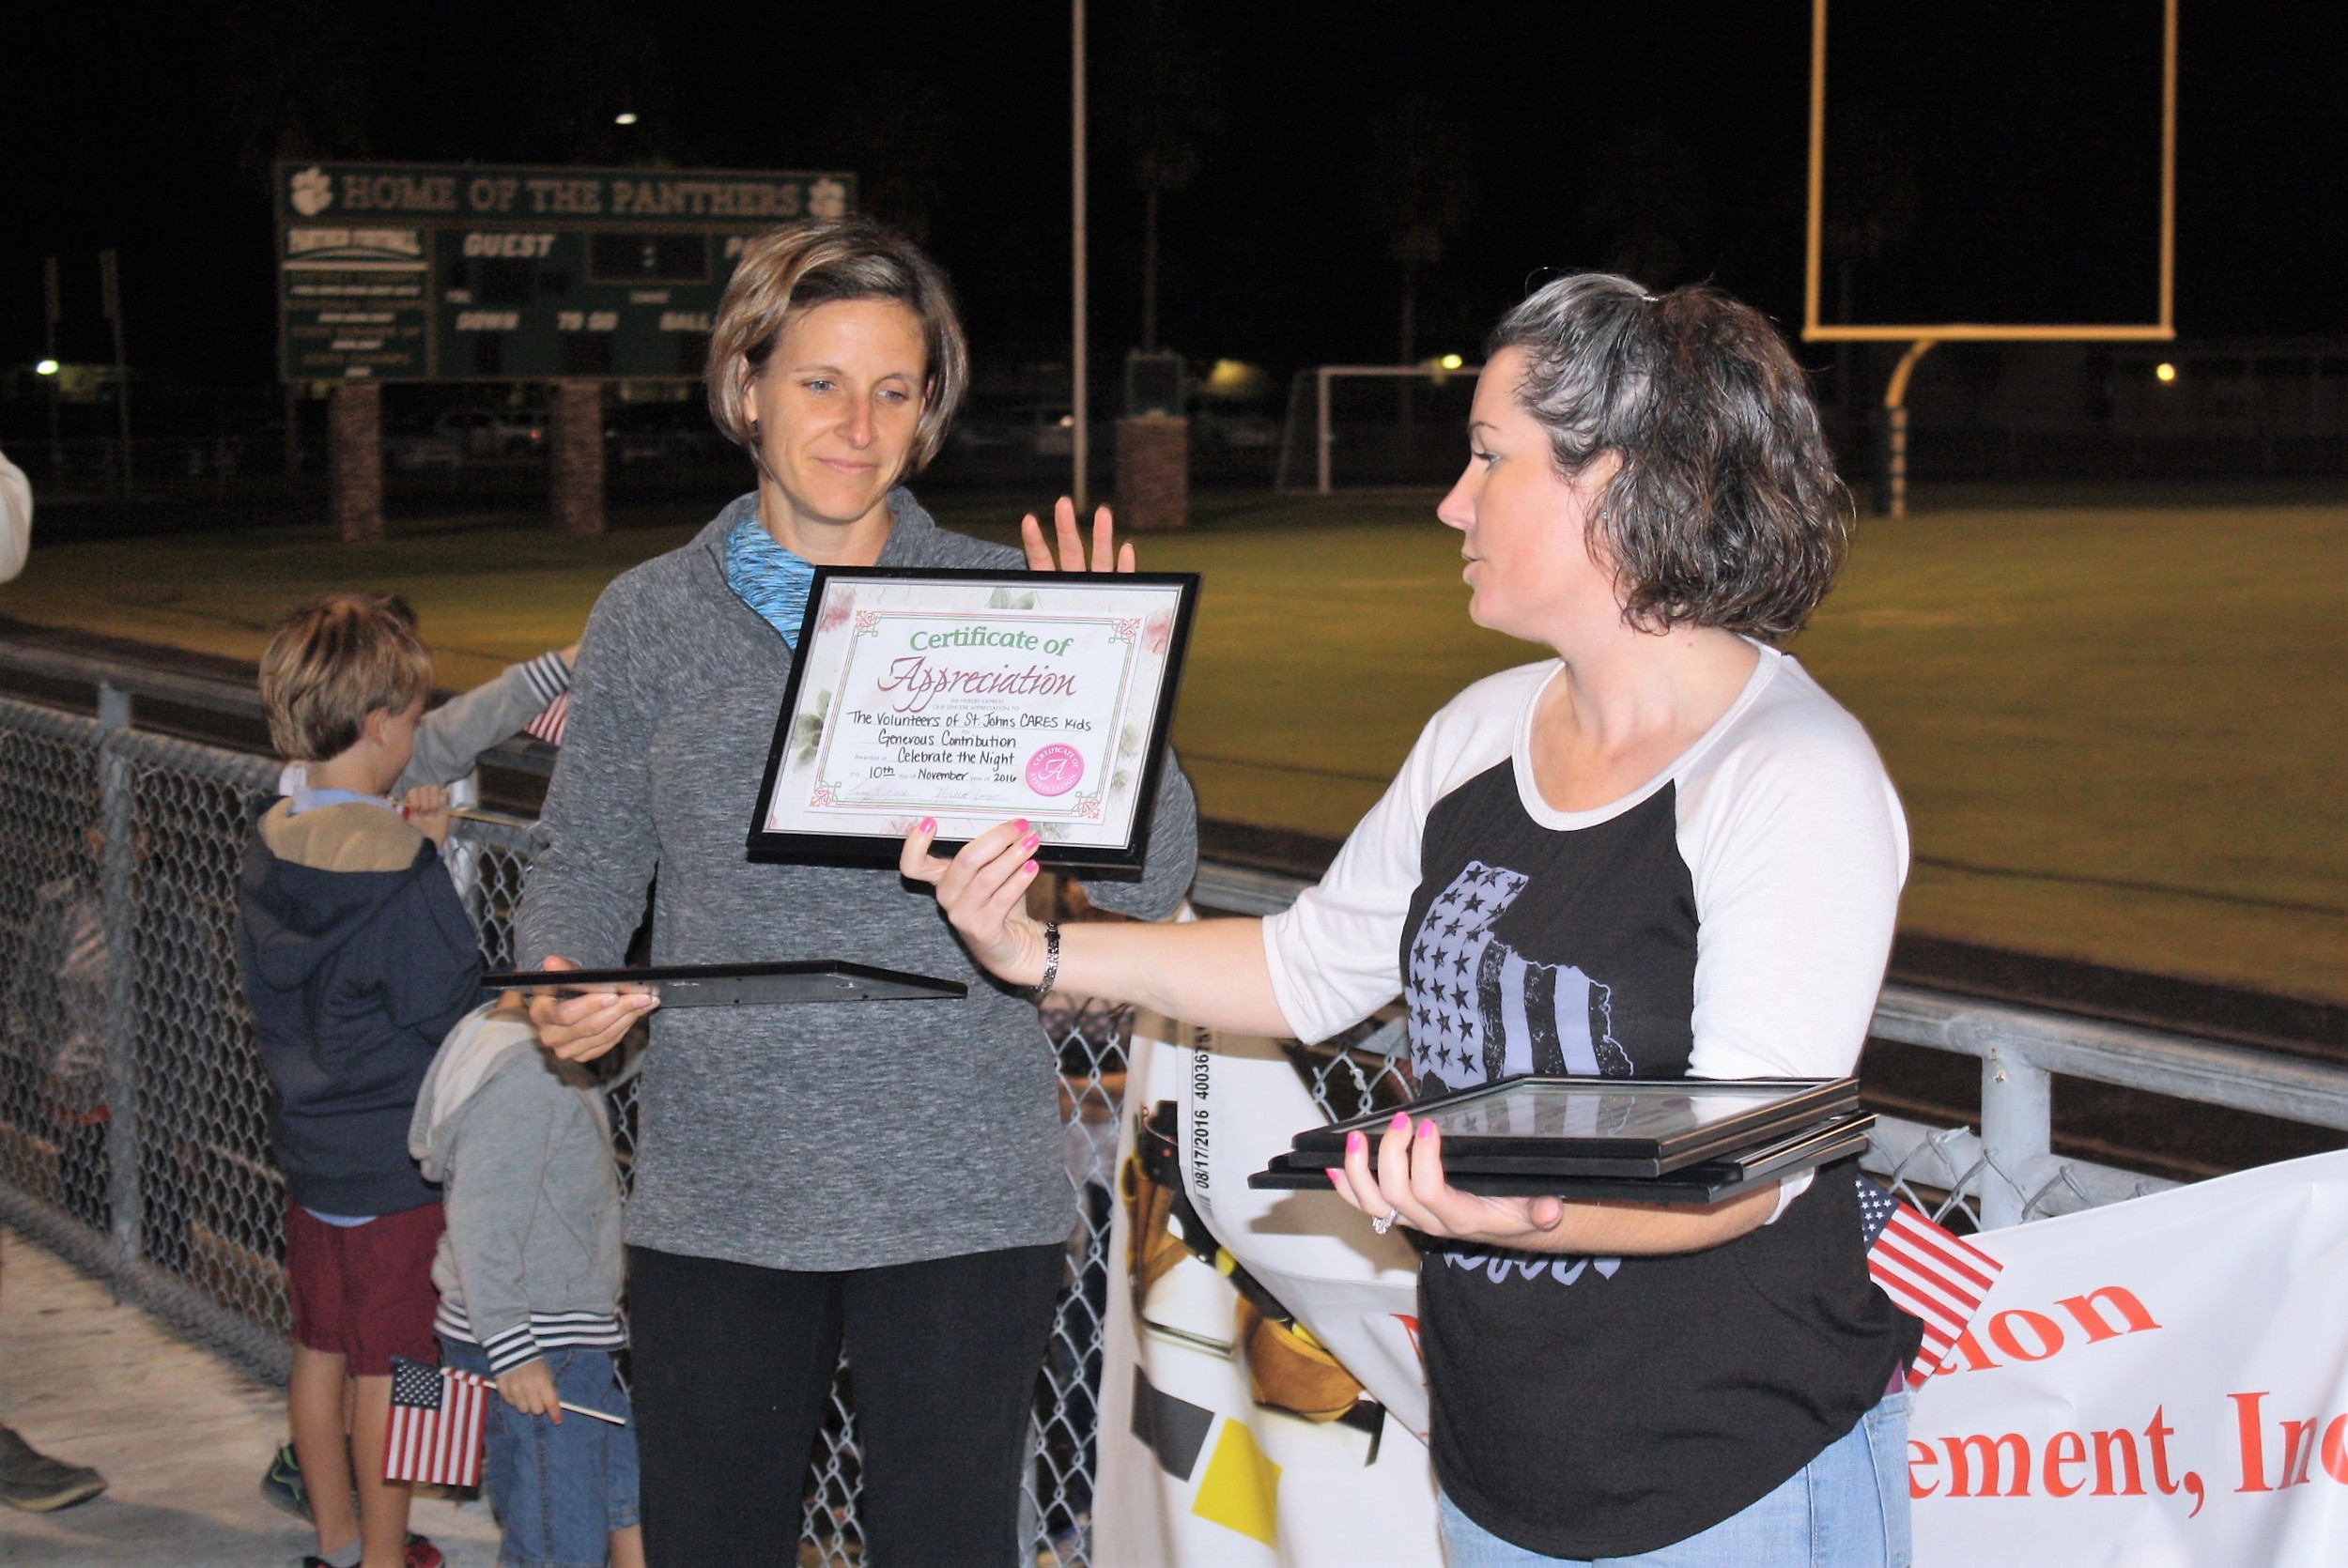 Jill D’Amato of St. Johns Cares Kids, which helped organize the event, receives a certificate of appreciation.